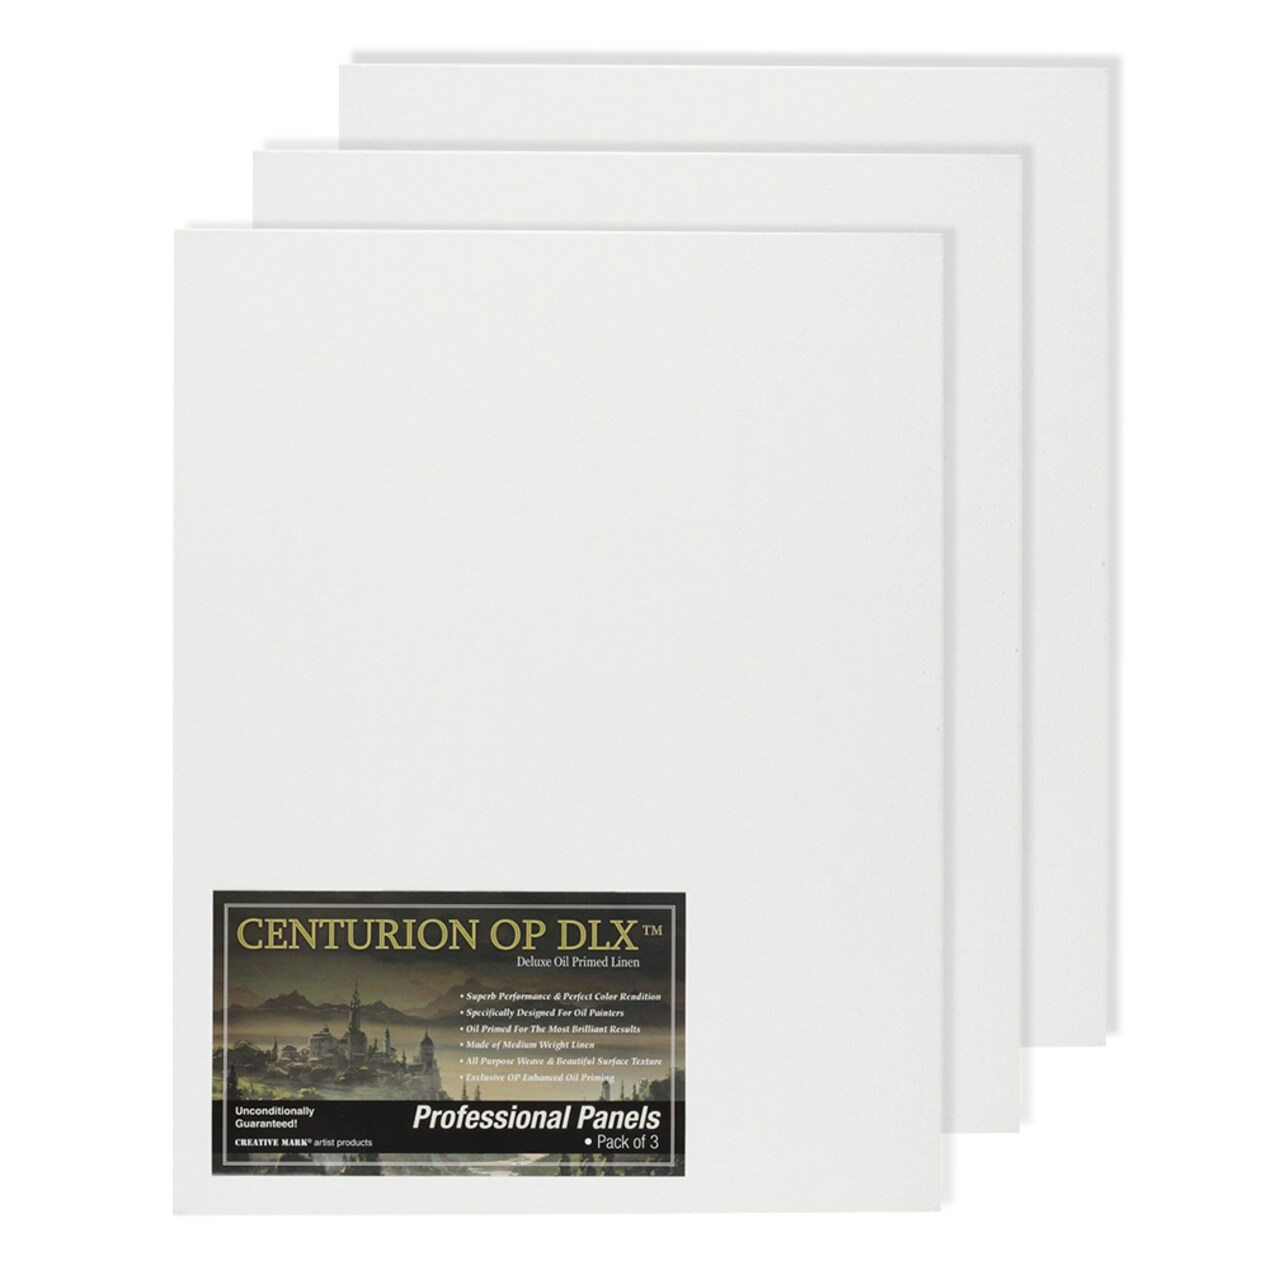 Centurion Deluxe Professional Oil Primed Linen Canvas Panels - 3 Pack of Linen Canvases for Painting, Artwork and More